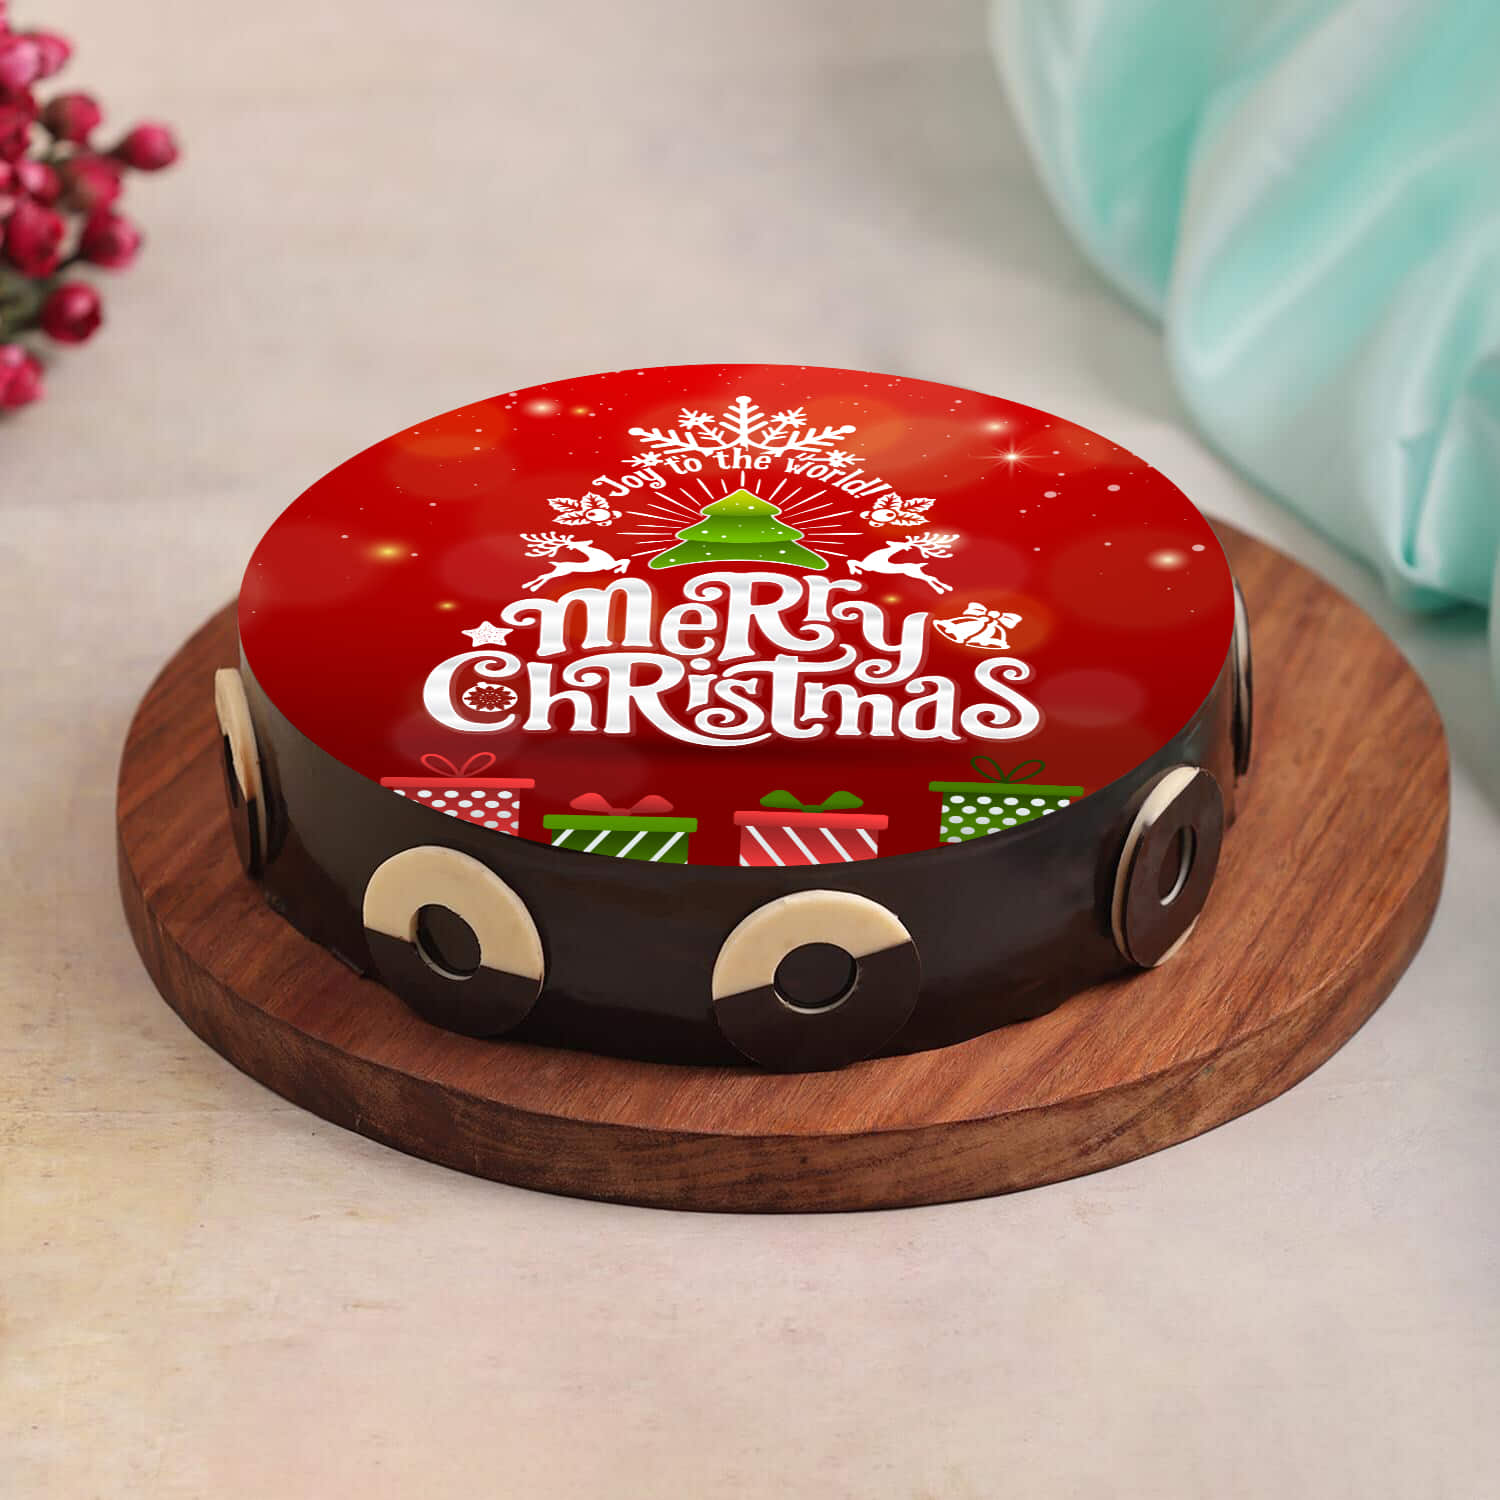 The Easy Hack to Turn a Plain Cake into a Stunning Christmas Dessert -